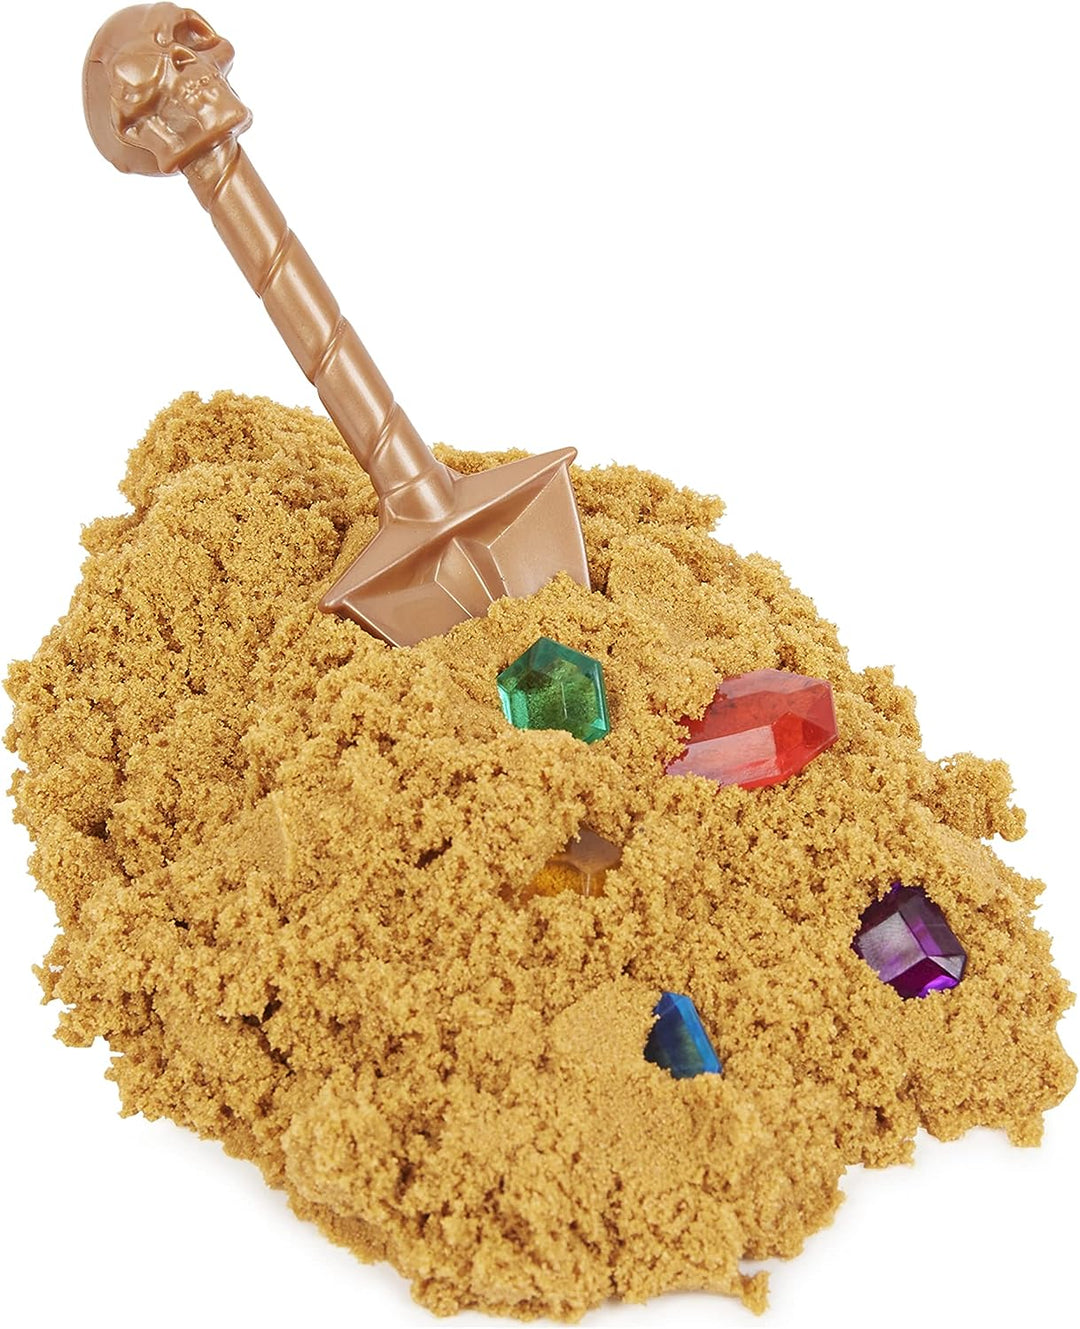 Kinetic Sand, Treasure Hunt Playset with 9 Surprise Reveals, 567g Brown and Rare Shimmer Gold Play Sand